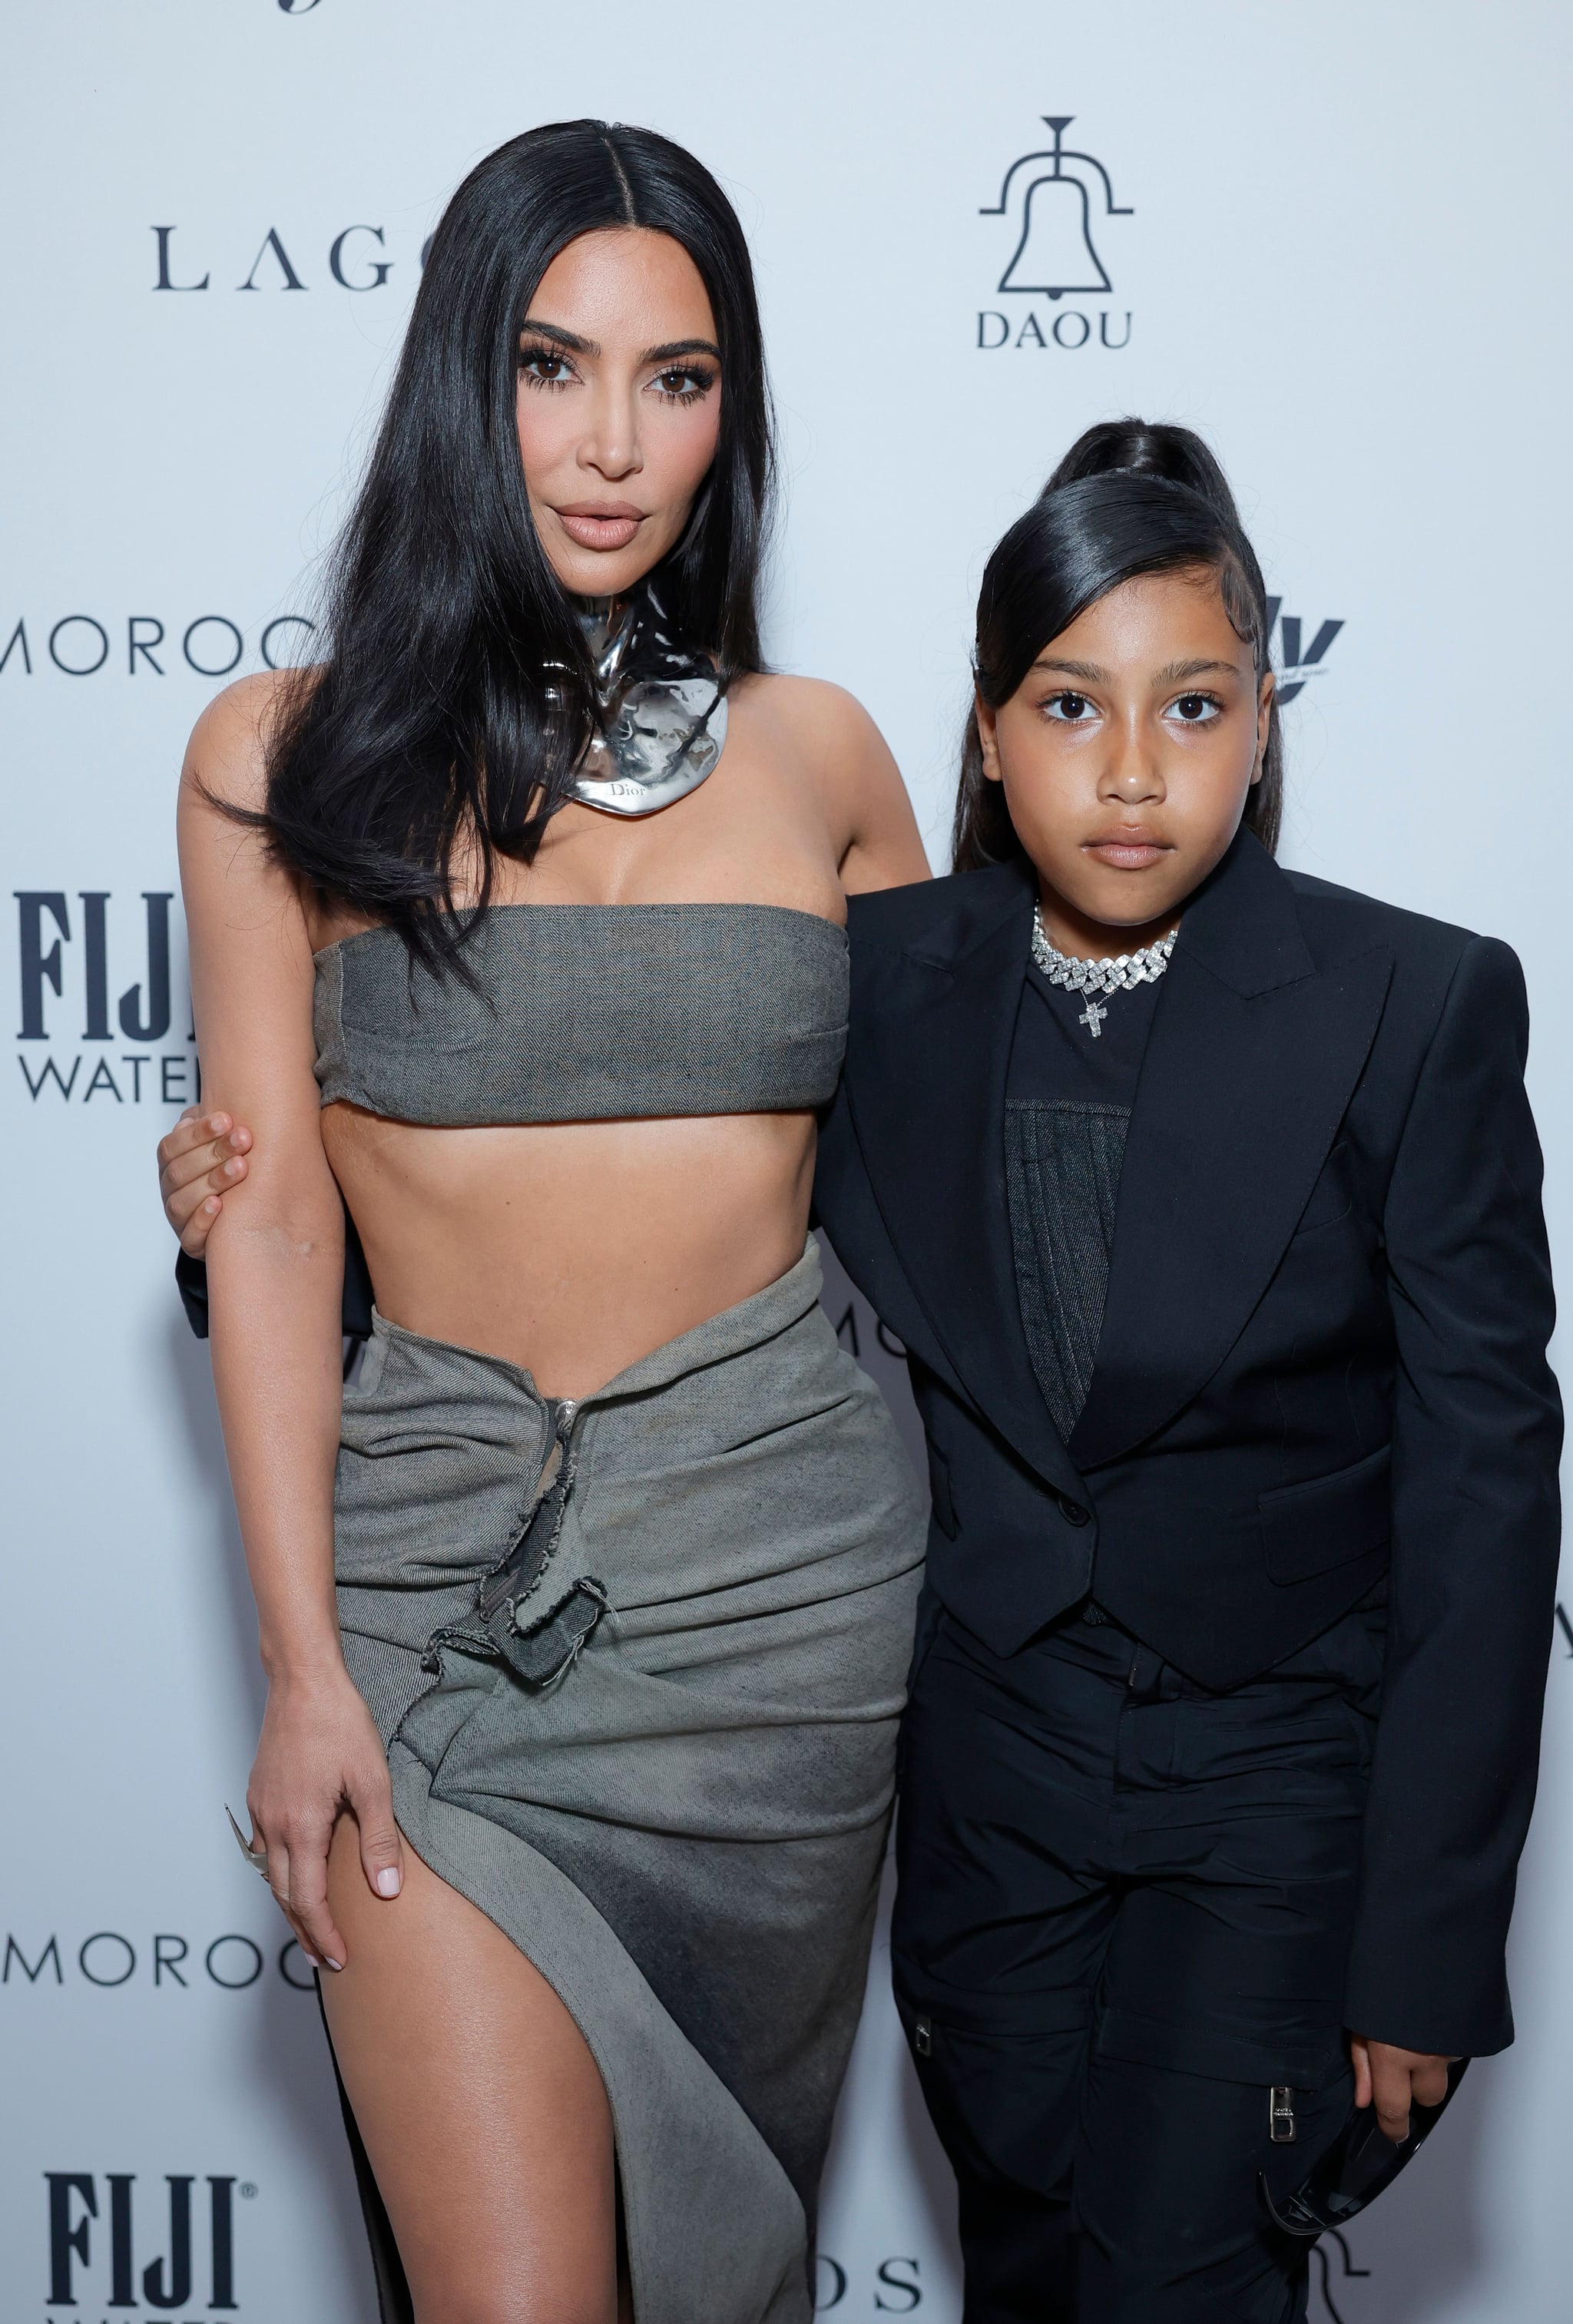 BEVERLY HILLS, CALIFORNIA - APRIL 23: (L-R) Kim Kardashian and North West attend The Daily Front Row's Seventh Annual Fashion Los Angeles Awards at The Beverly Hills Hotel on April 23, 2023 in Beverly Hills, California. (Photo by Stefanie Keenan/Getty Images for Daily Front Row)